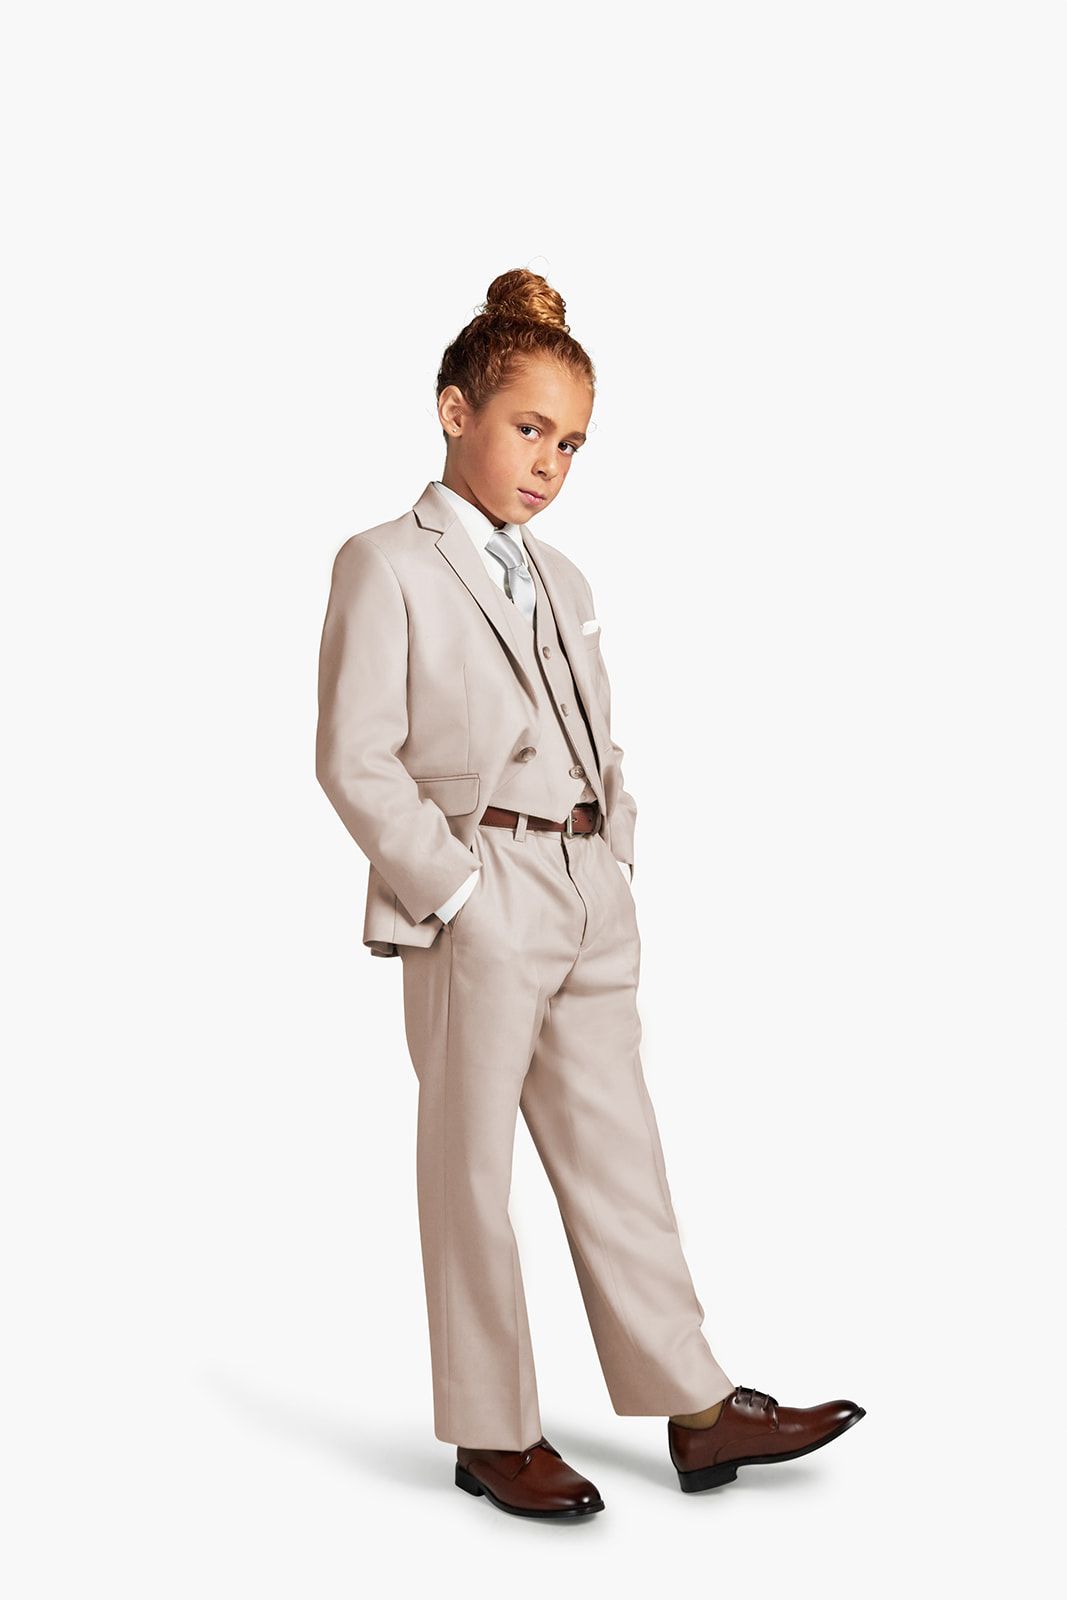 BRITISH TAN SUIT for kids, boys, children, and teens